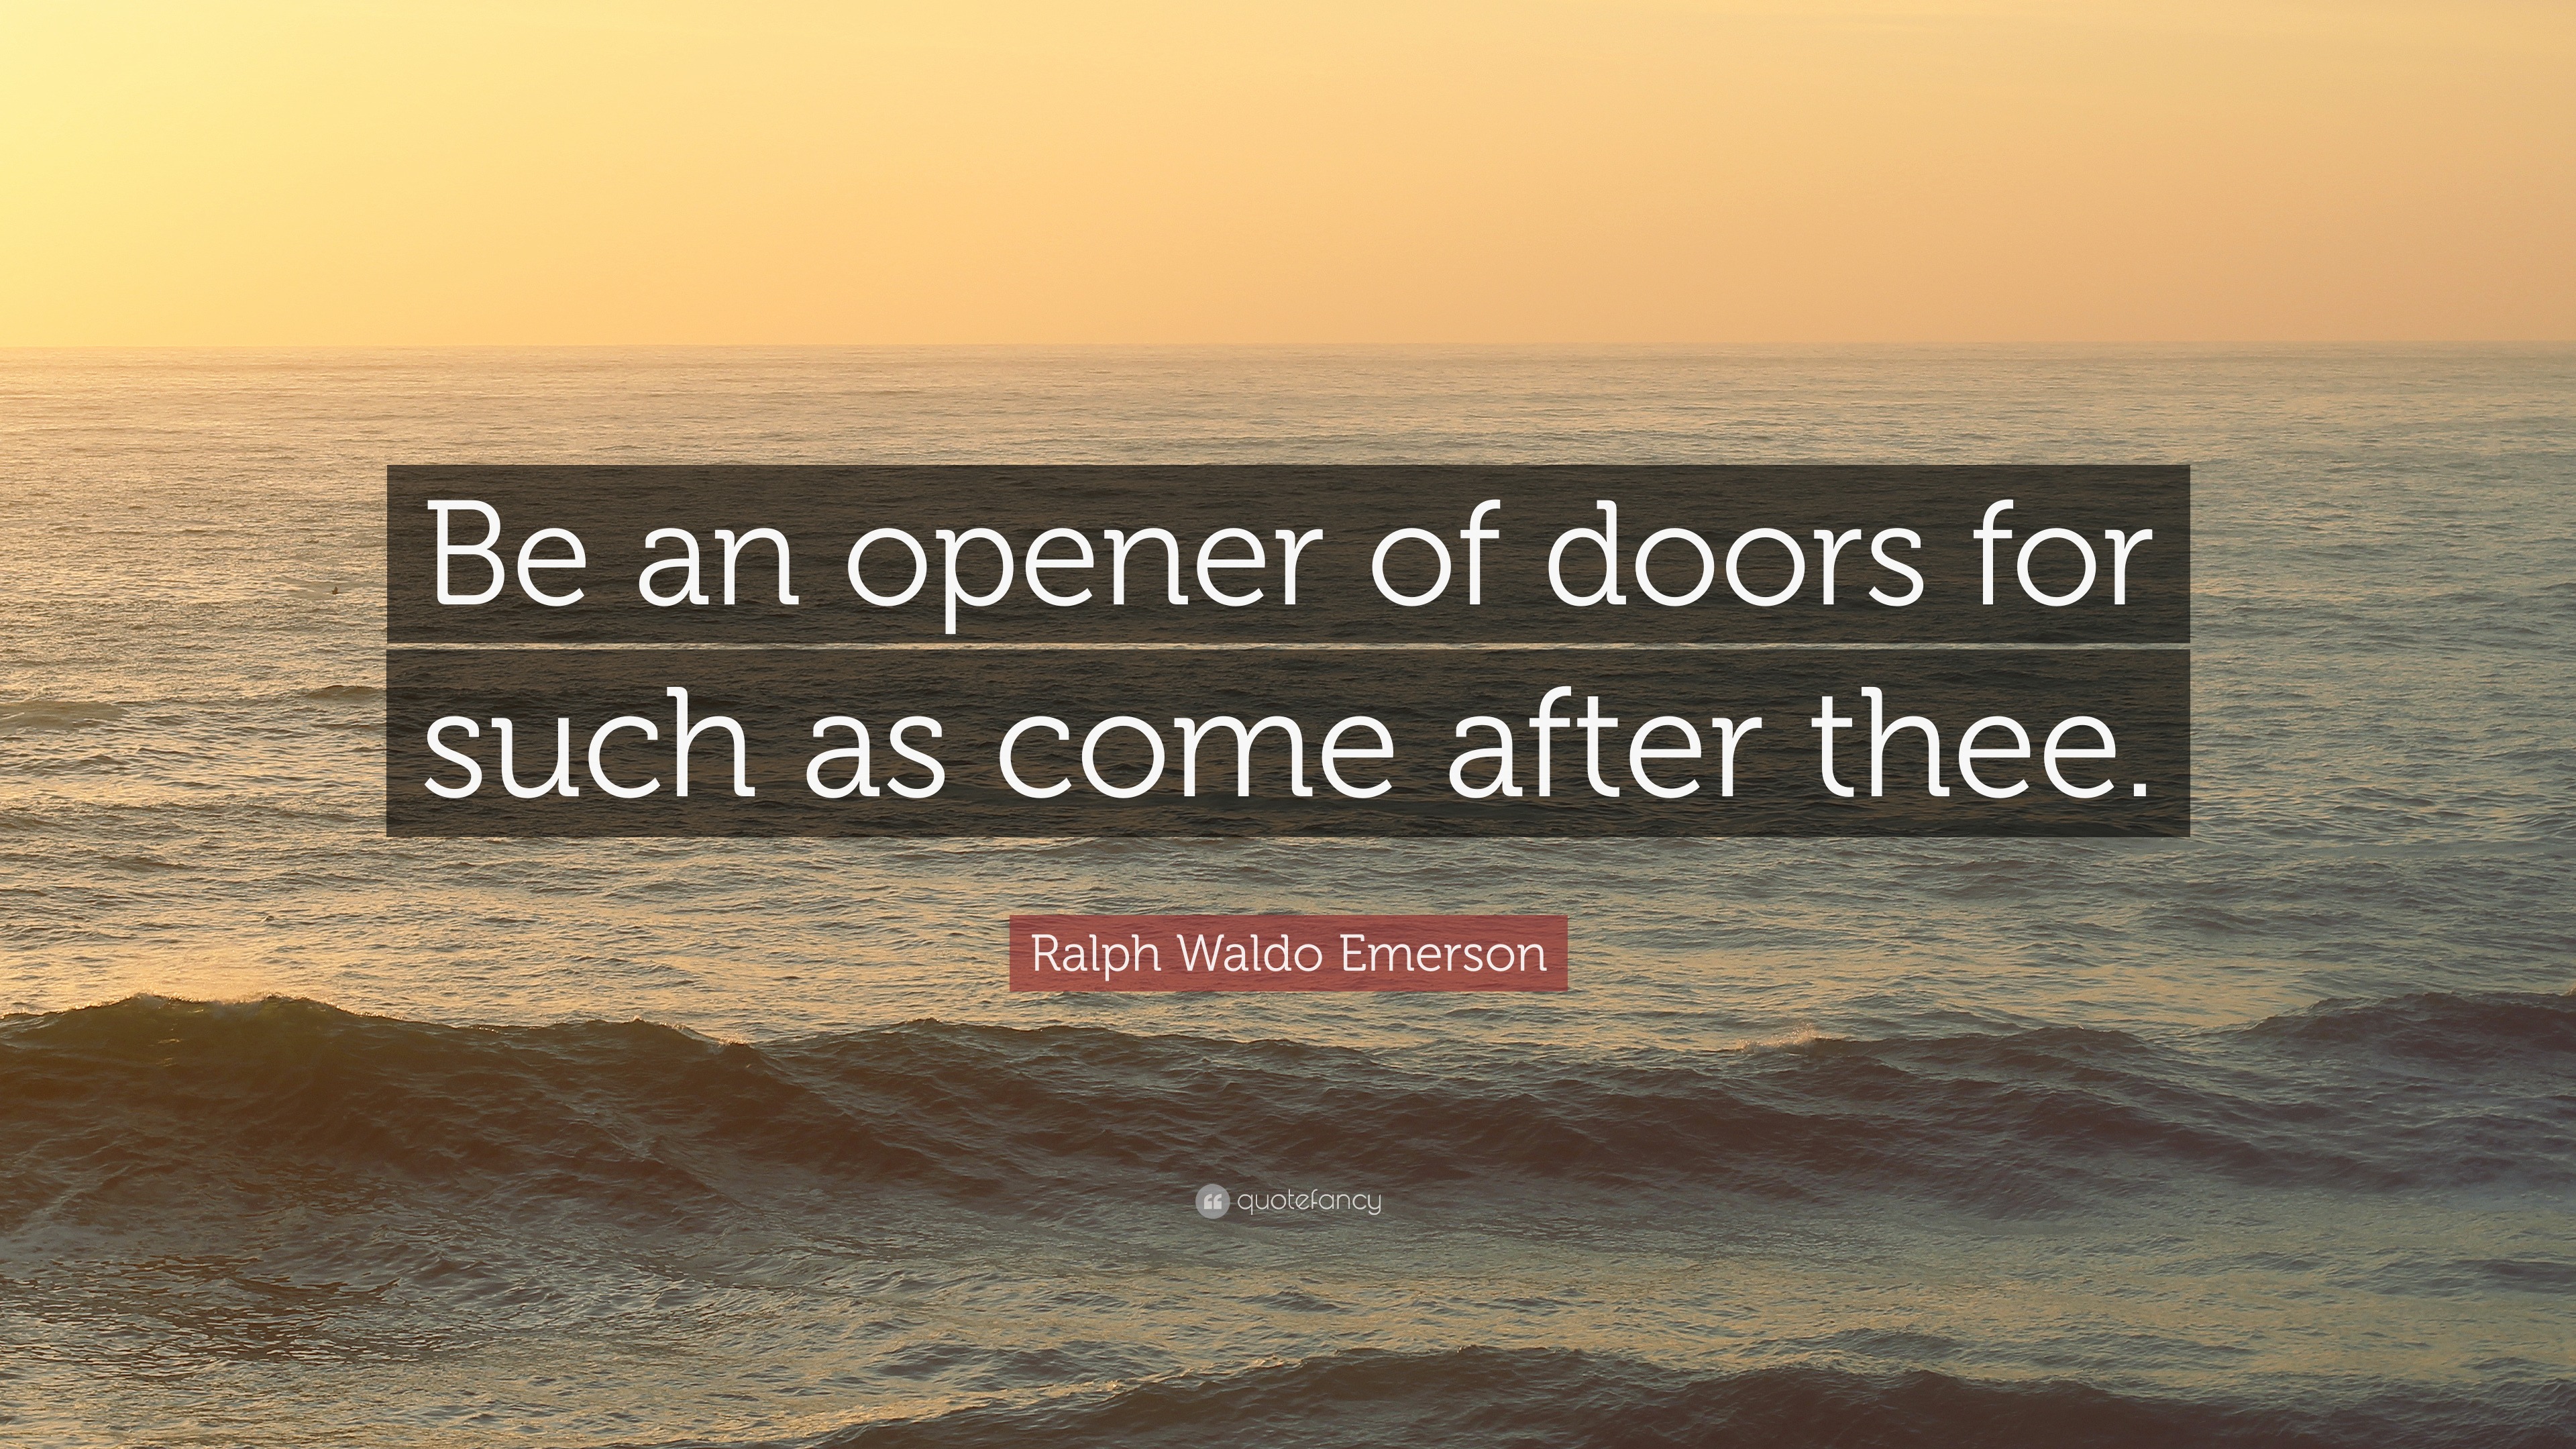 https://quotefancy.com/media/wallpaper/3840x2160/3719376-Ralph-Waldo-Emerson-Quote-Be-an-opener-of-doors-for-such-as-come.jpg